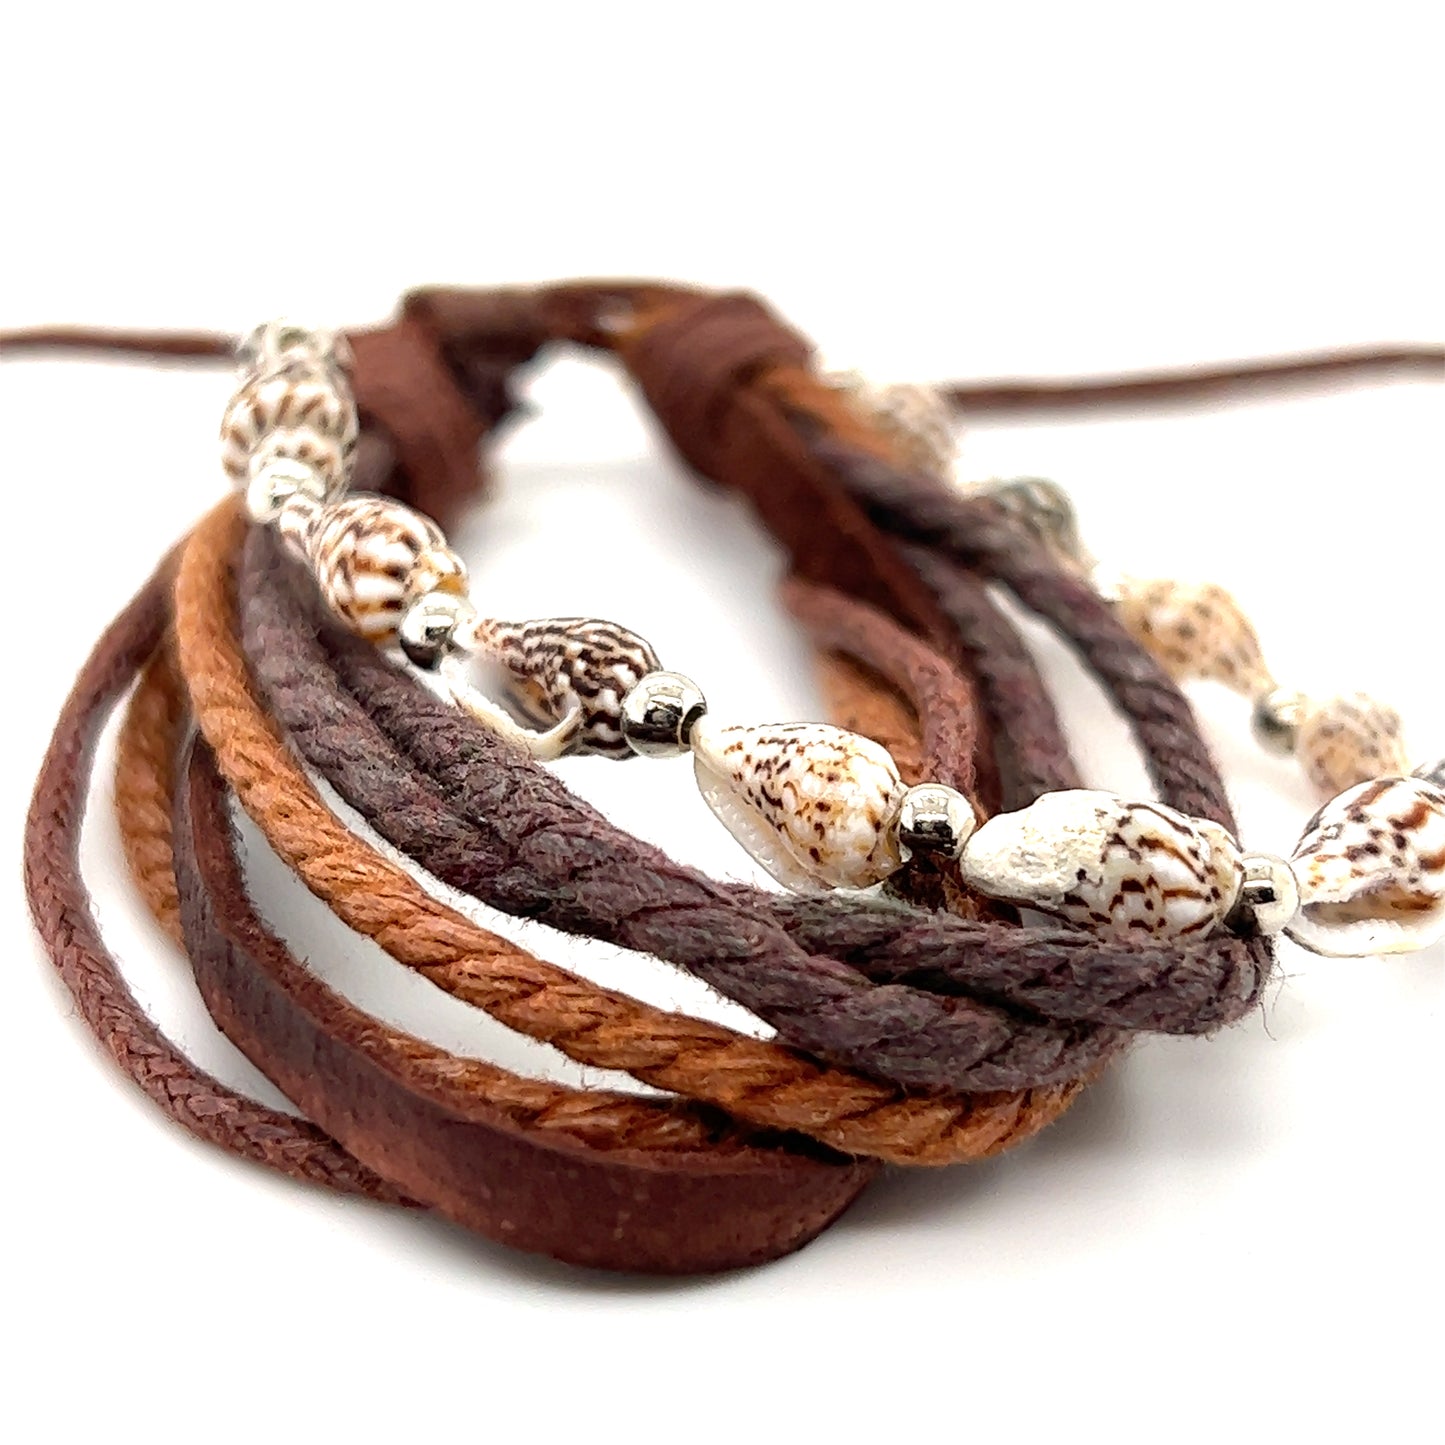 A Super Silver Rope Shell Bracelet with brown leather and sea shells, perfect for everyday wear. The band is adjustable for a comfortable fit.